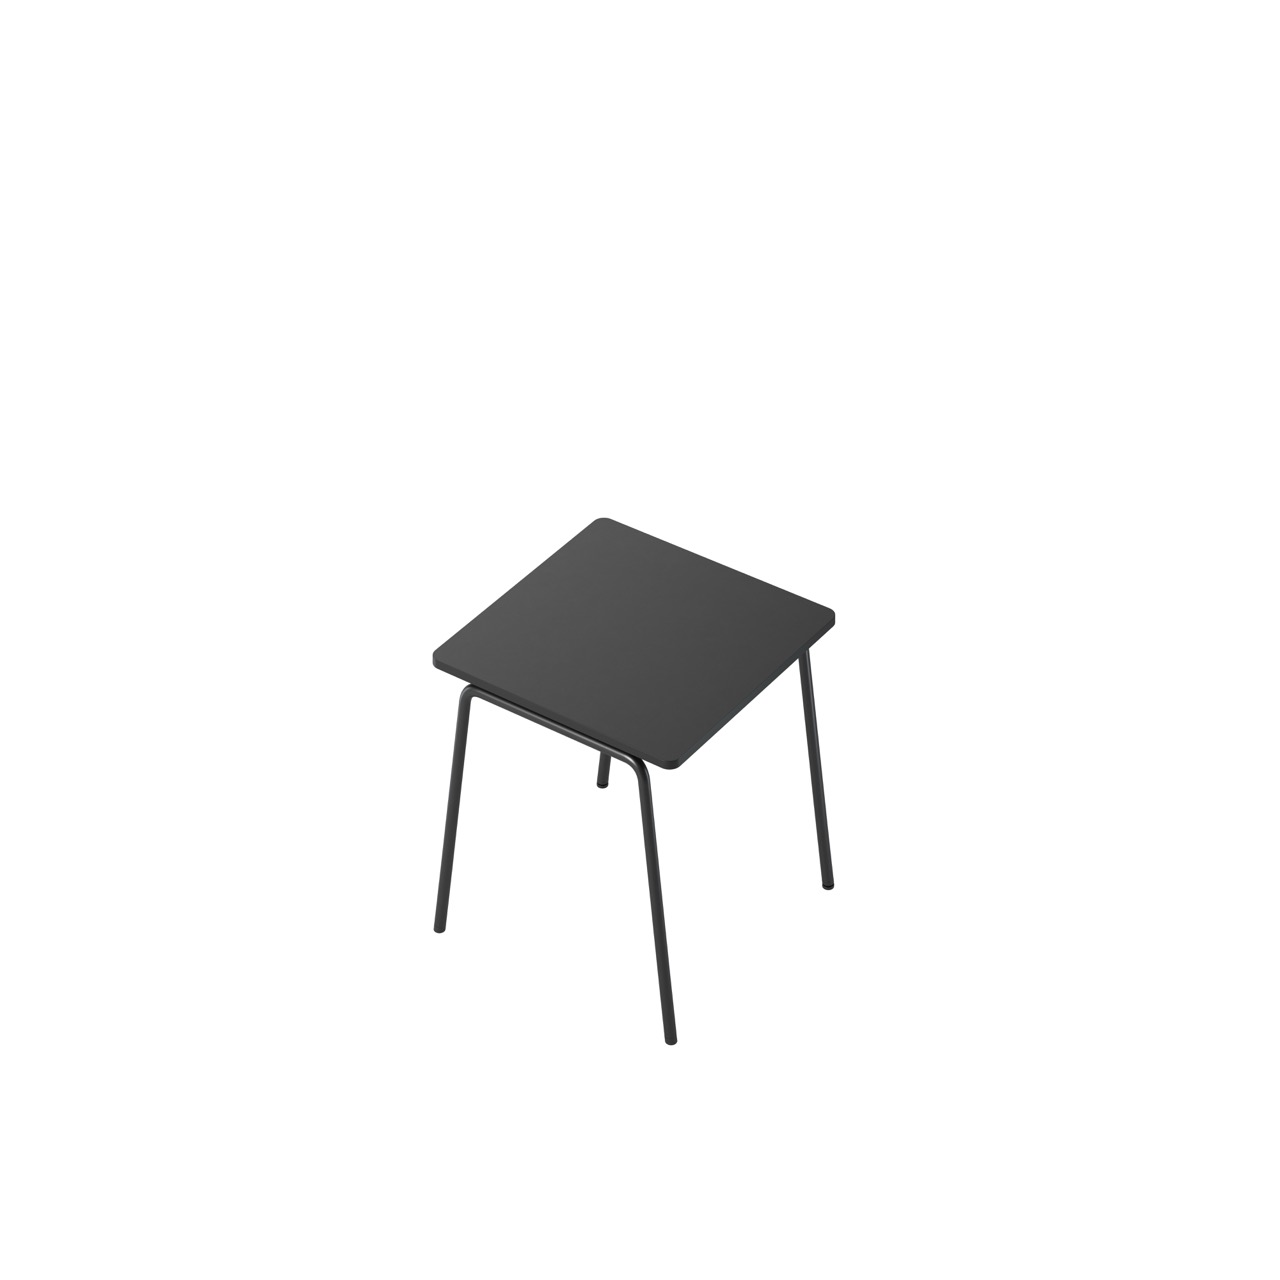 OCEE&FOUR - Tables - FourReal 74 - 80 x 80 - Angled - Packshot Image 2 Large